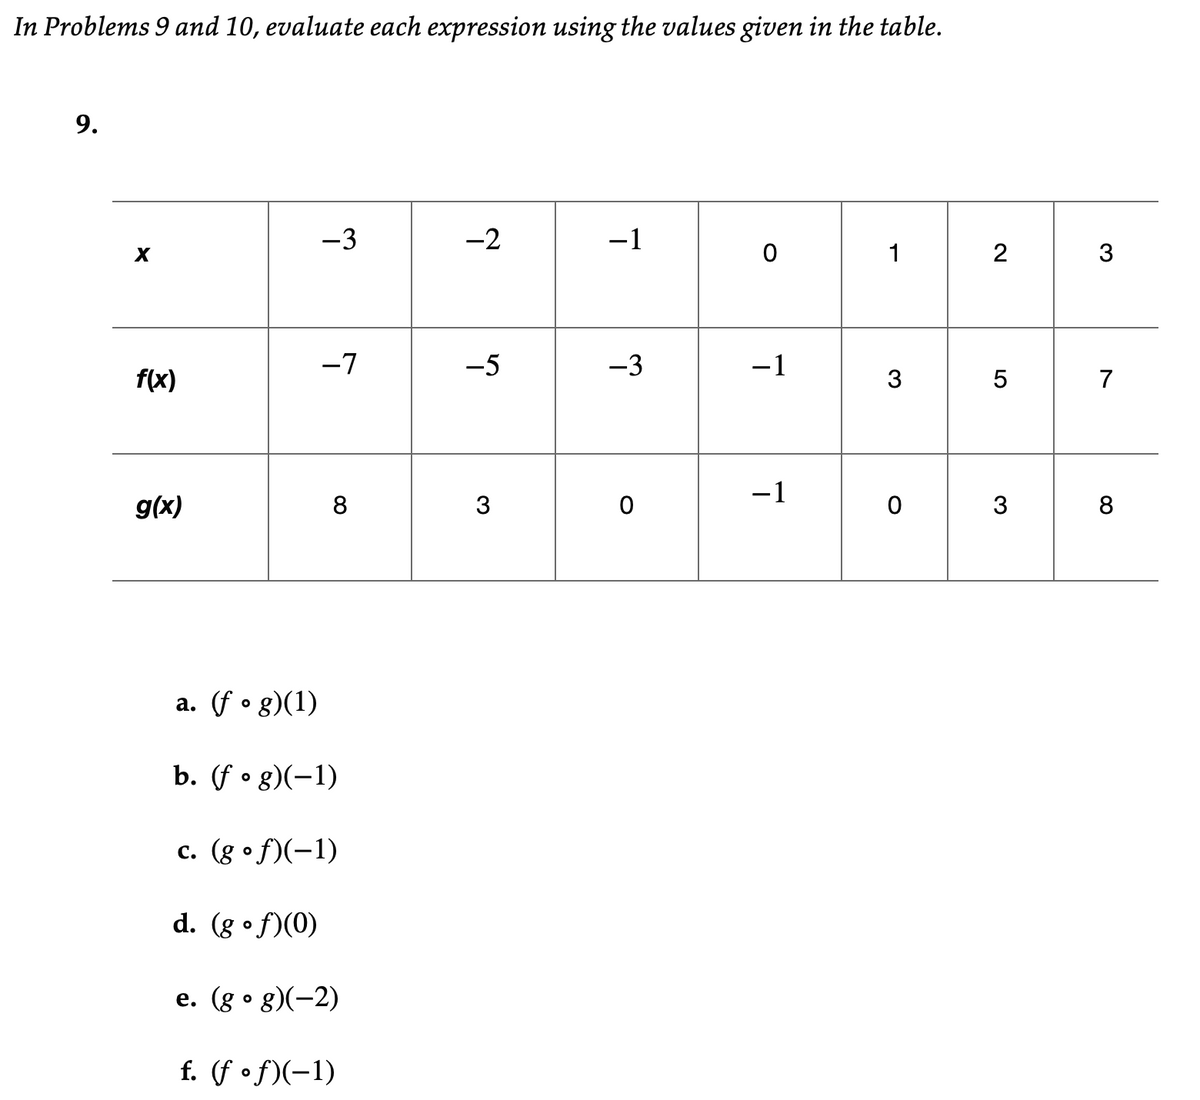 In Problems 9 and 10, evaluate each expression using the values given in the table.
9.
-3
-2
-1
1
2
3
-7
-5
-3
-1
f(x)
3
7
-1
g(x)
8
3
3
8
a. (f • g)(1)
b. (f • g)(-1)
c. (g •f)(-1)
d. (g • f)(0)
е. (g o g)(-2)
f. (f •f)(-1)
